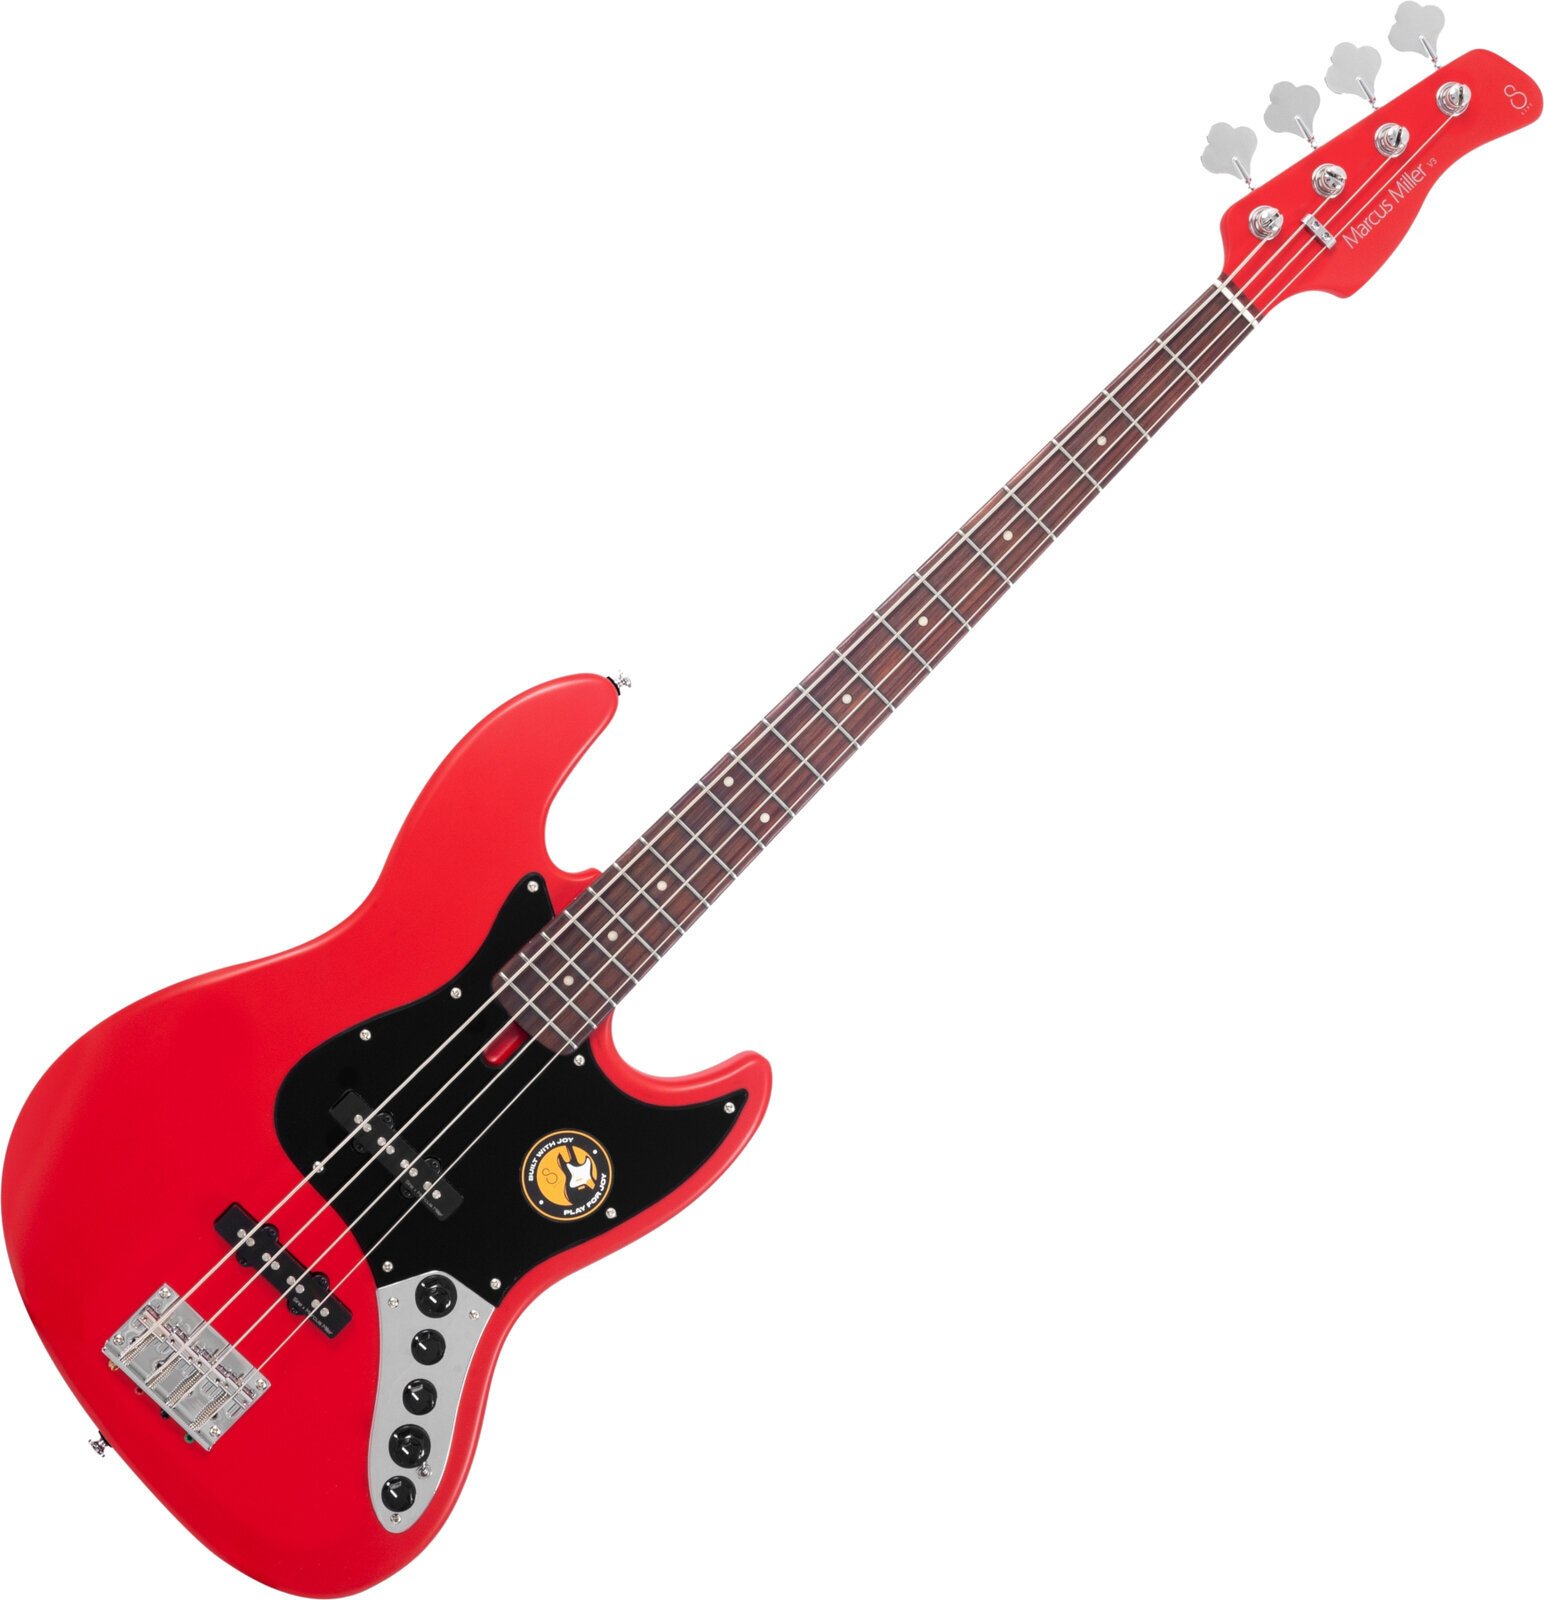 E-Bass Sire Marcus Miller V3-4 Red Satin